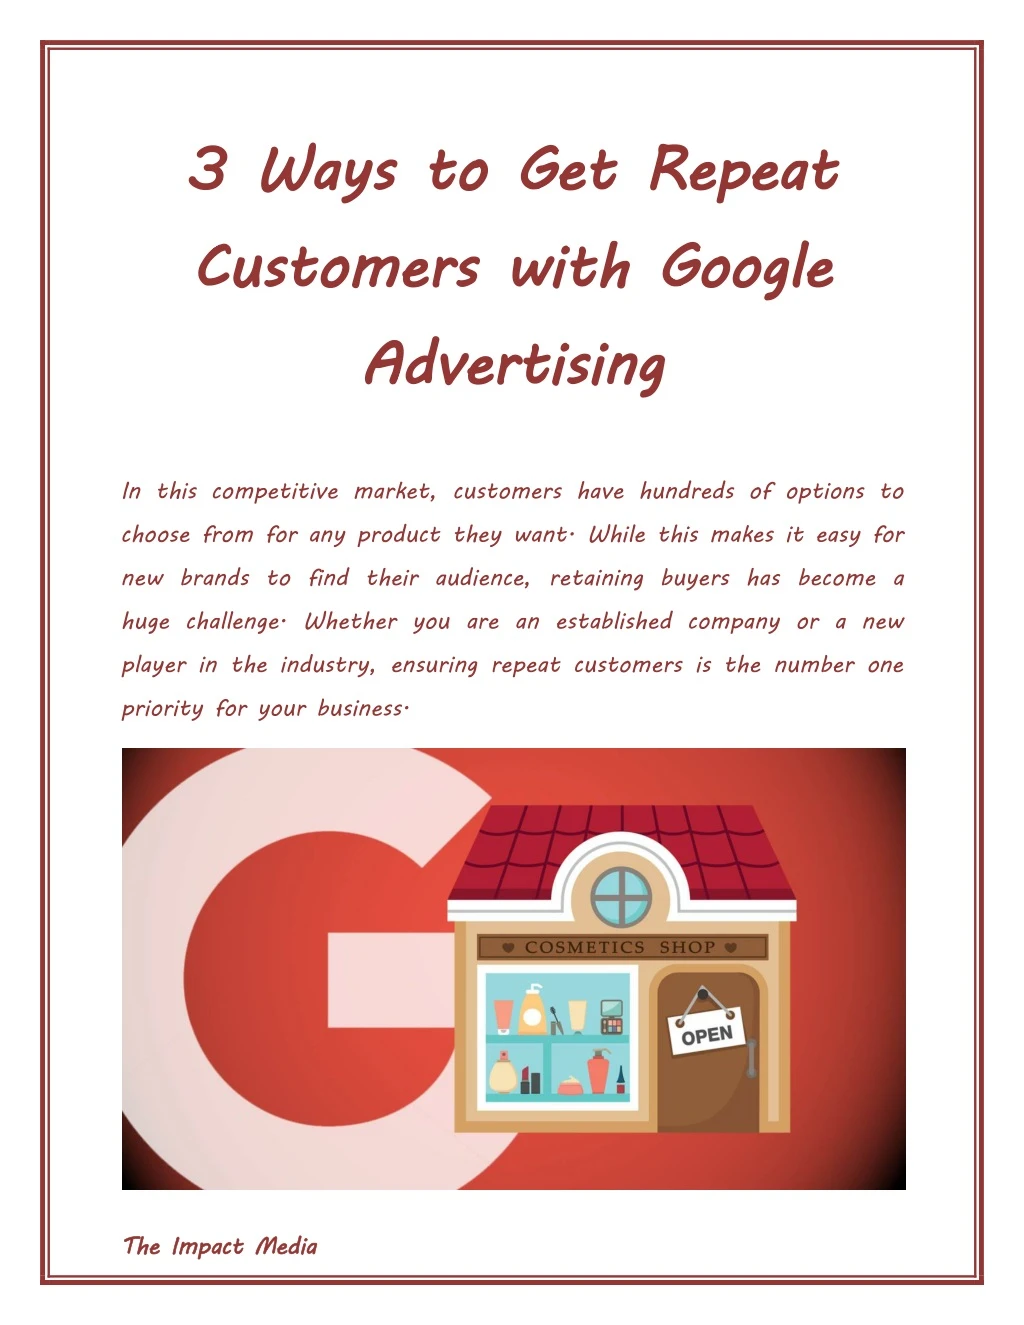 3 ways to get repeat customers advertising